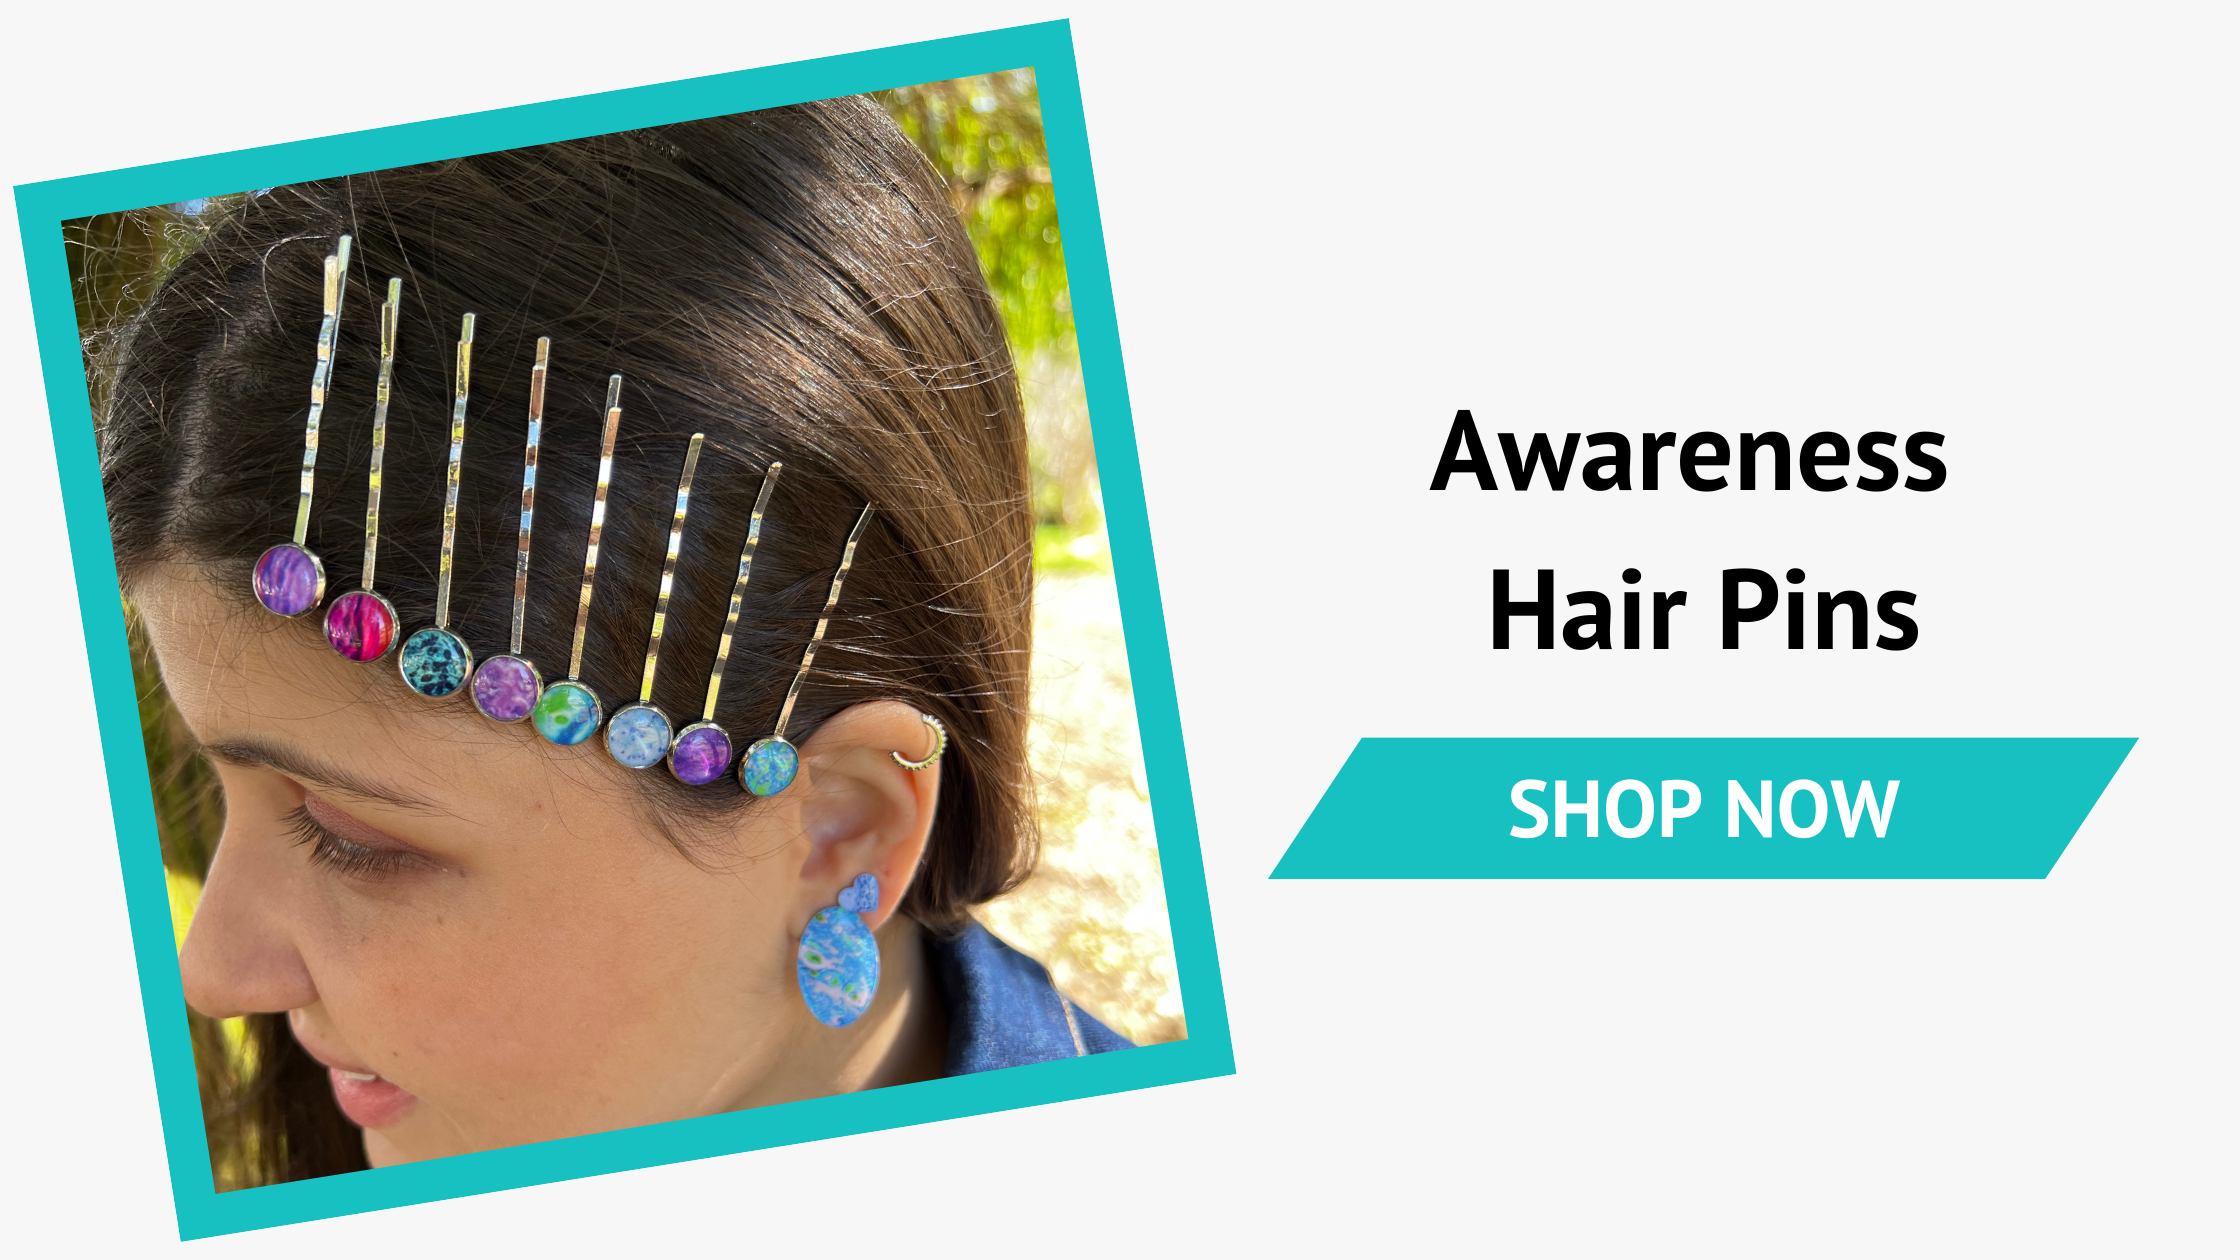 Awareness Hair Pins for Charity